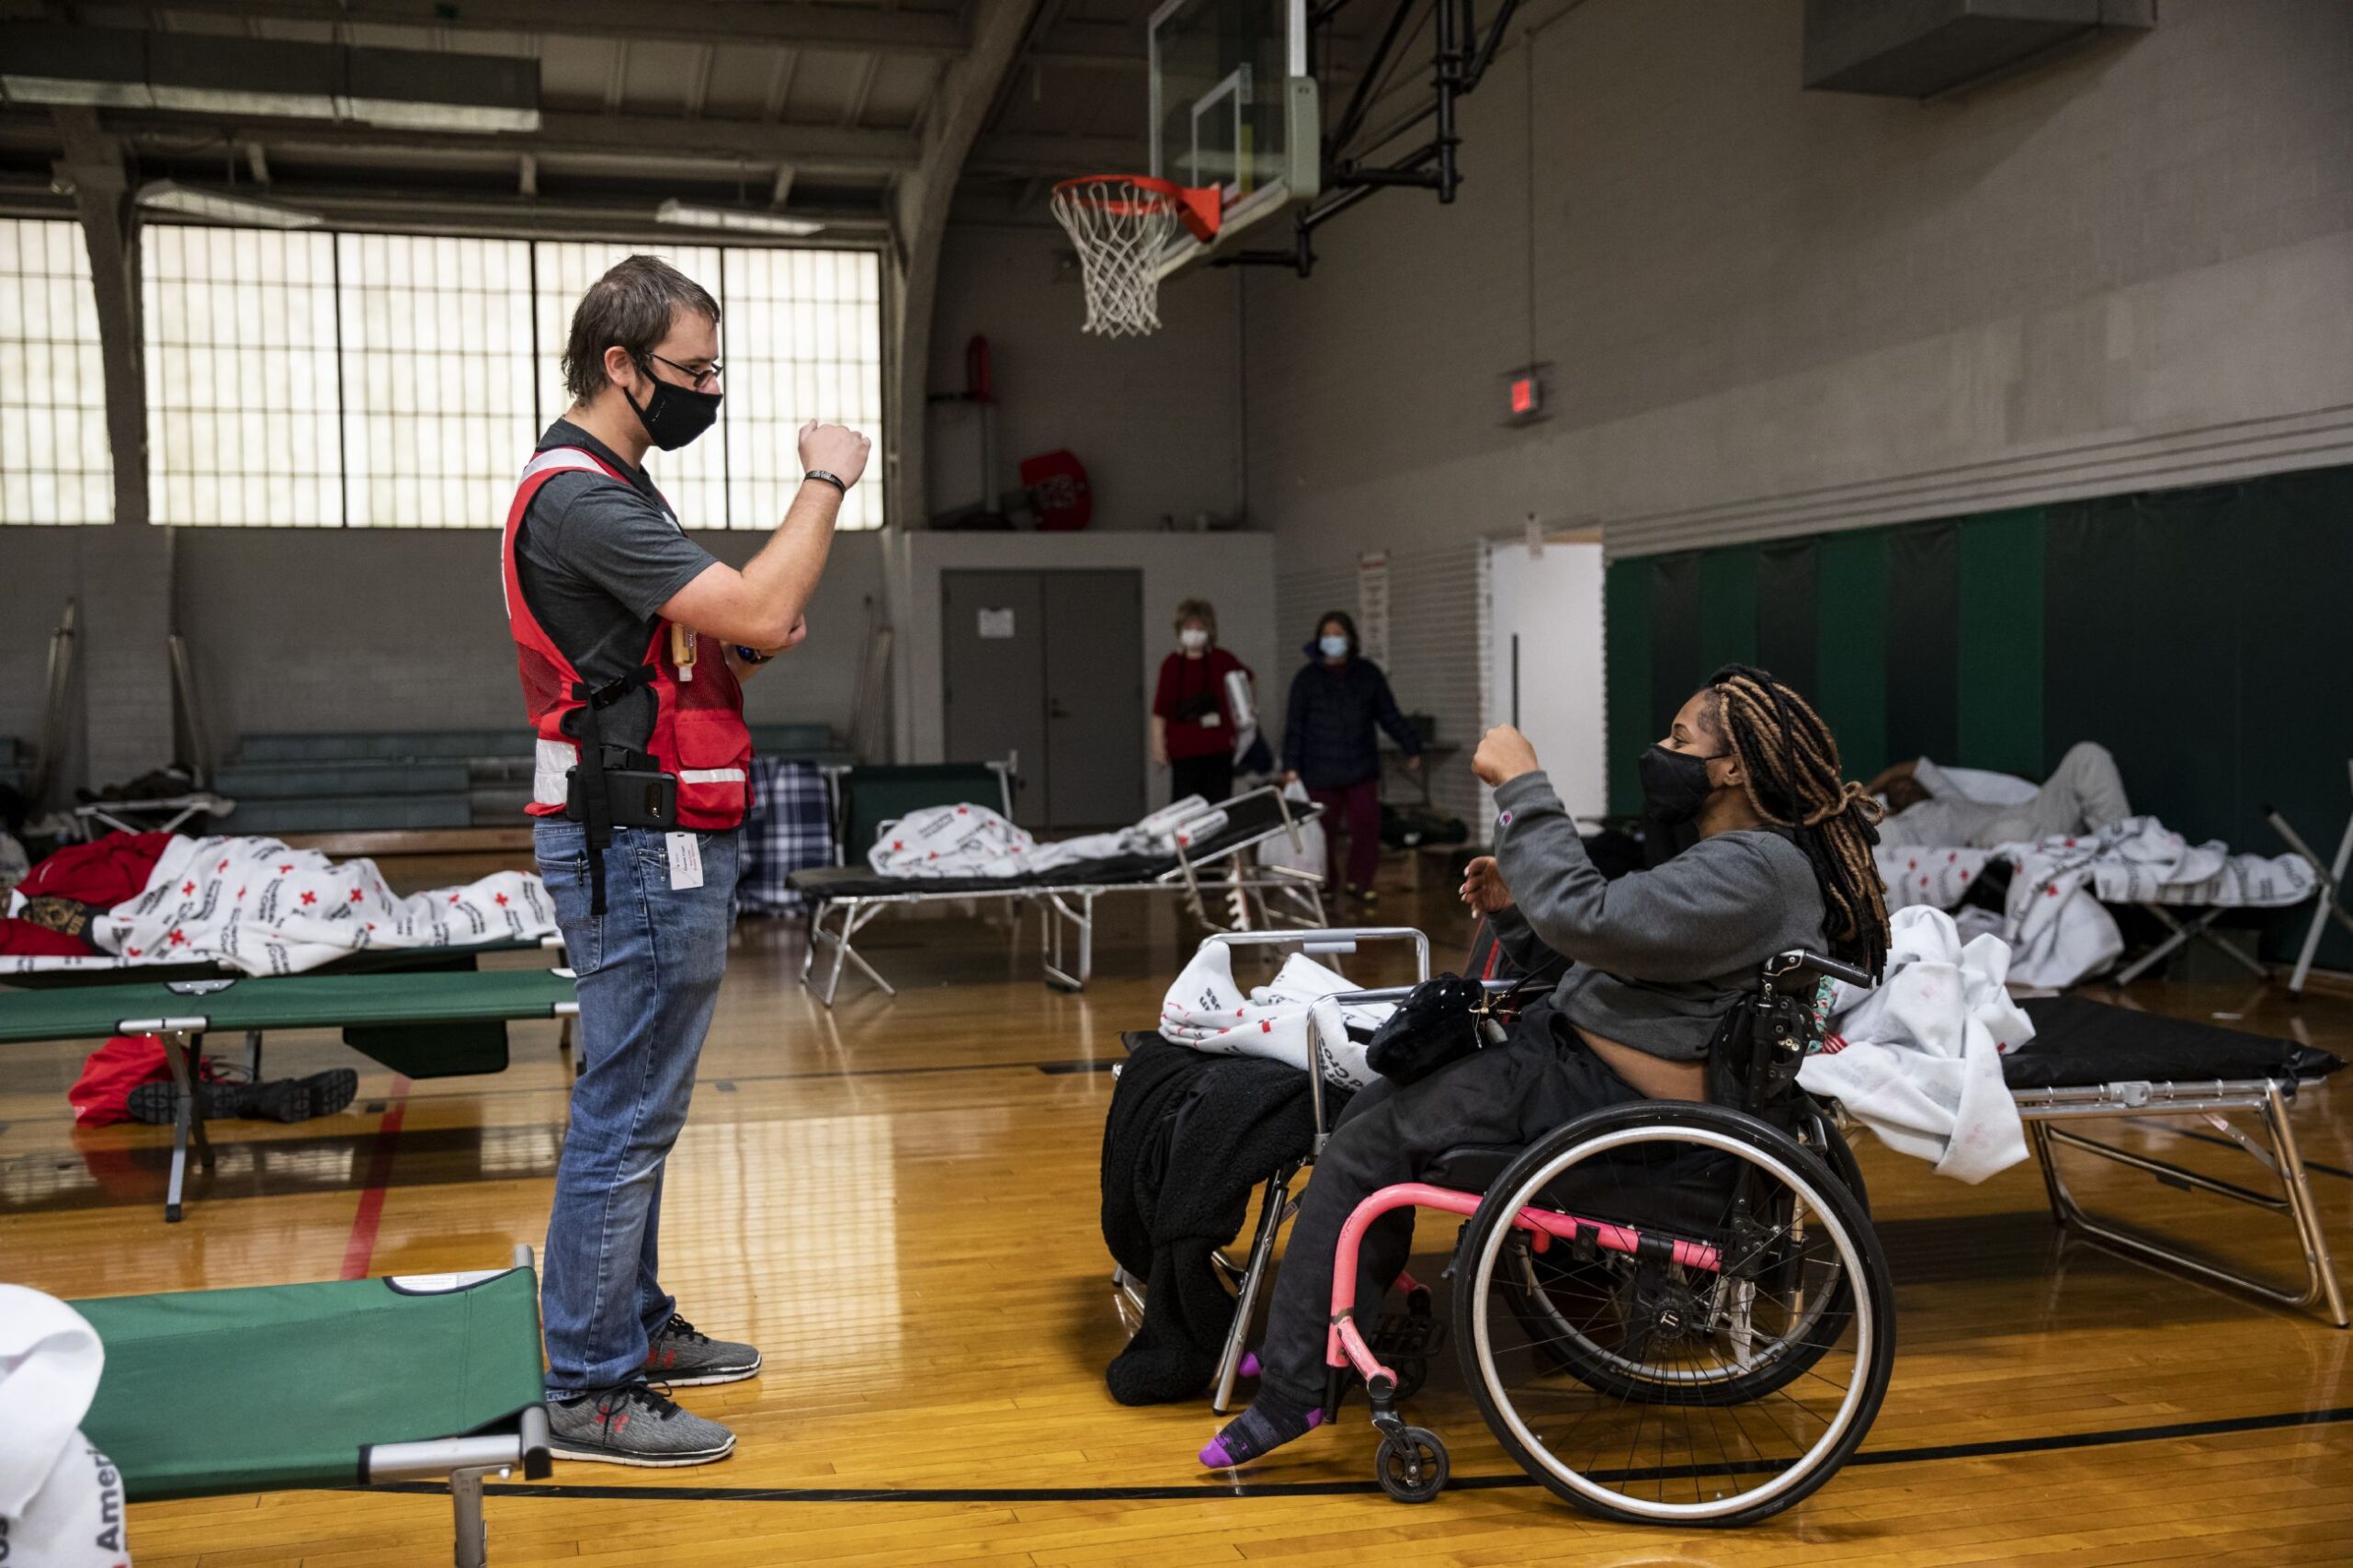 The image depicts disability inclusion during an emergency response situation, with an individual in a wheelchair being assisted by a Red Cross volunteer in a gymnasium temporarily converted into a shelter.